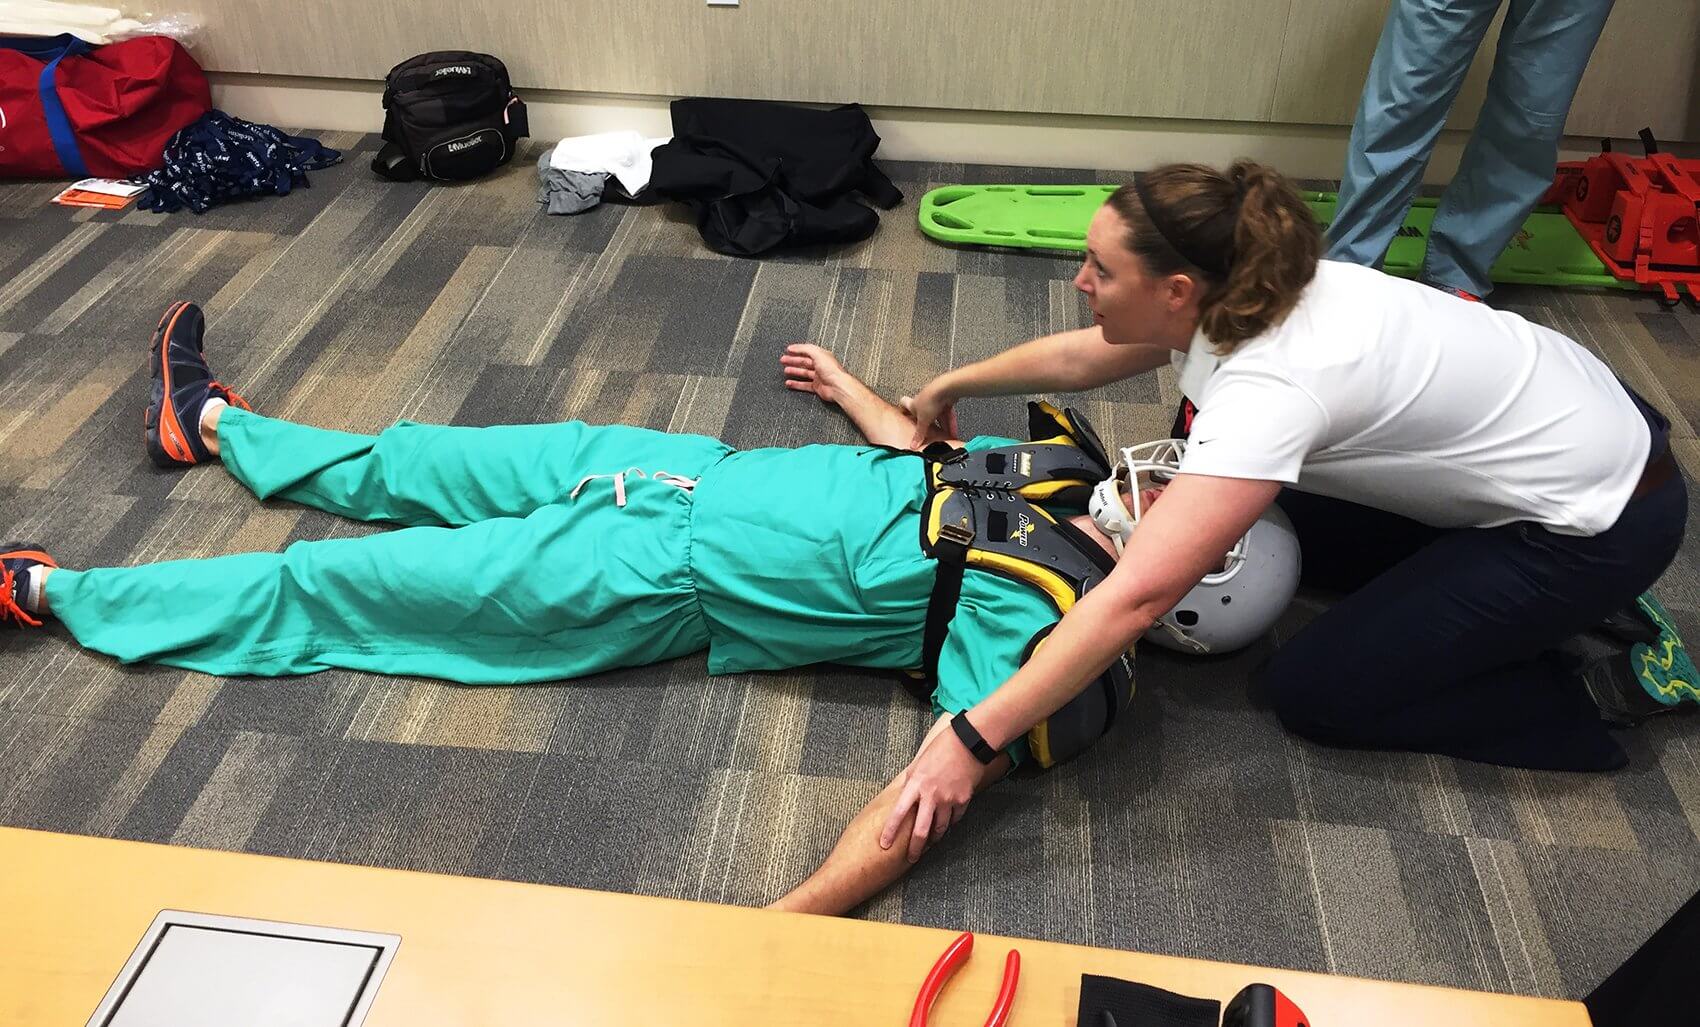 Baylor College of Medicine residents practice the new National Athletic Trainers’ Association guidelines. (Credit: Baylor College of Medicine)